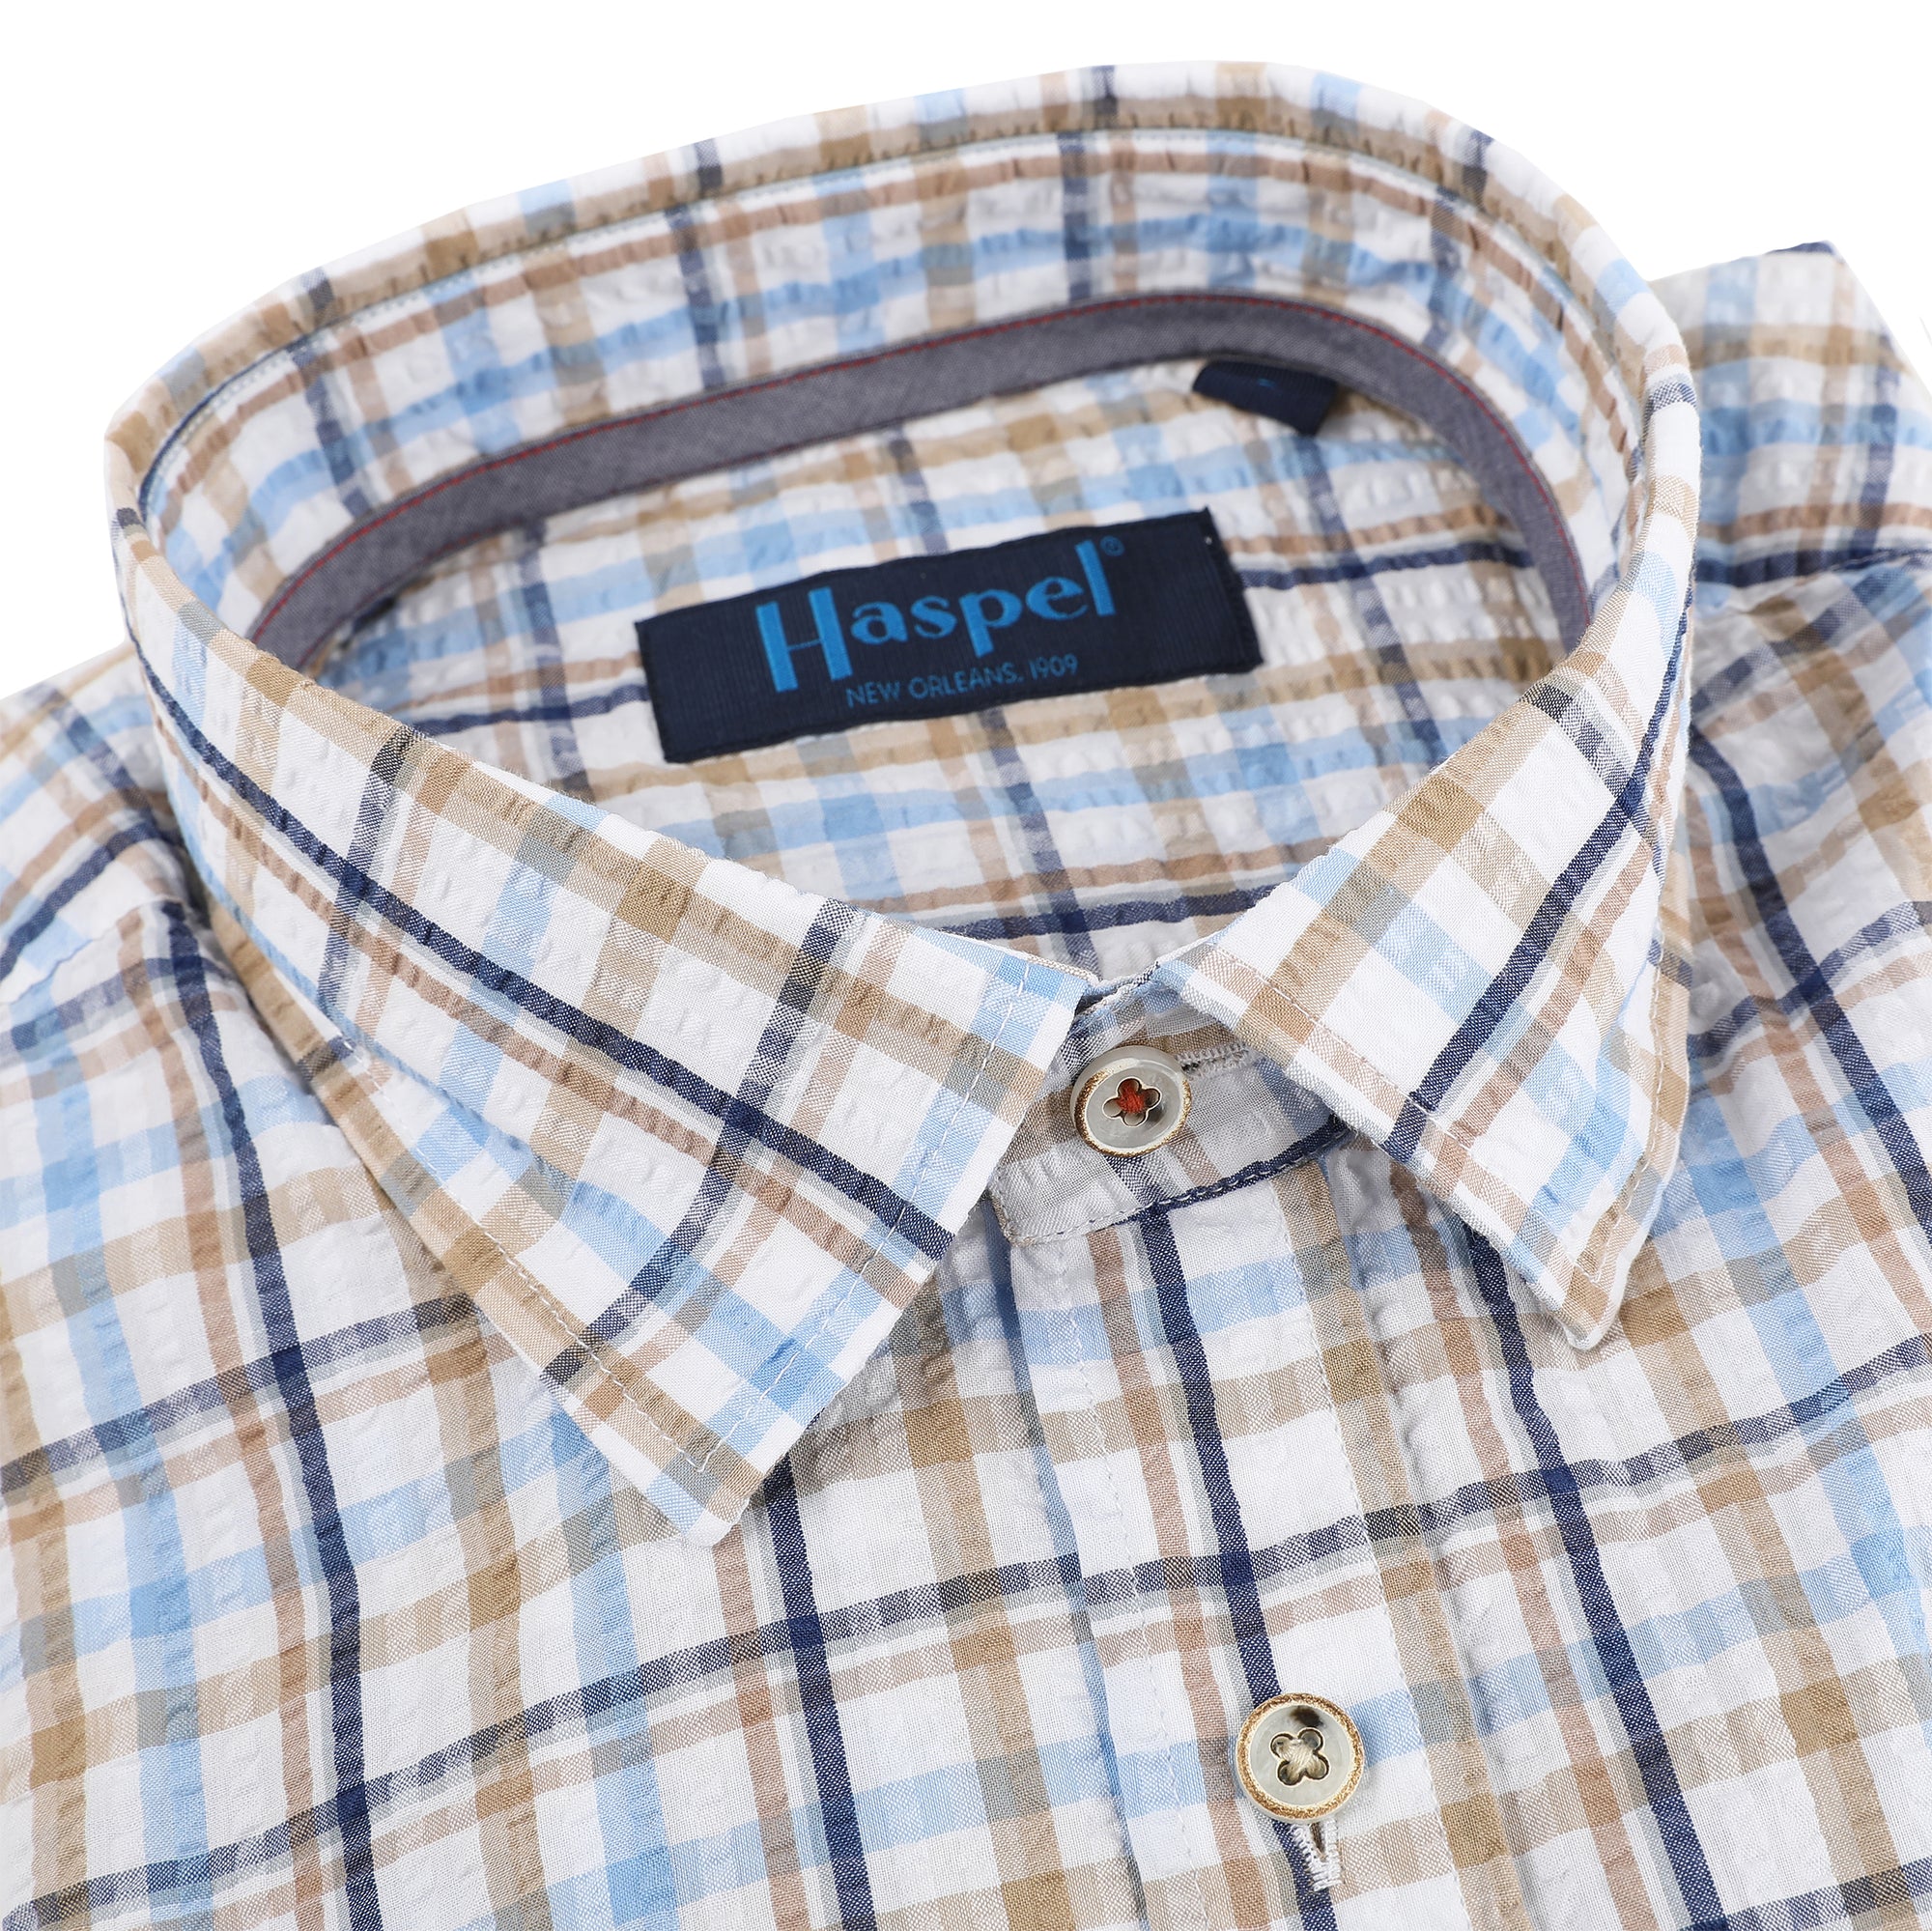 Look oh-so-cool and stay feeling hot with this Naples Blue & Tan Long Sleeve Check Seersucker Shirt. Crafted from lightweight seersucker fabric that's craft fully dyed for a unique look, you'll be ready for warm weather, whatever the season. Pucker up for a style that'll have onlookers in awe.